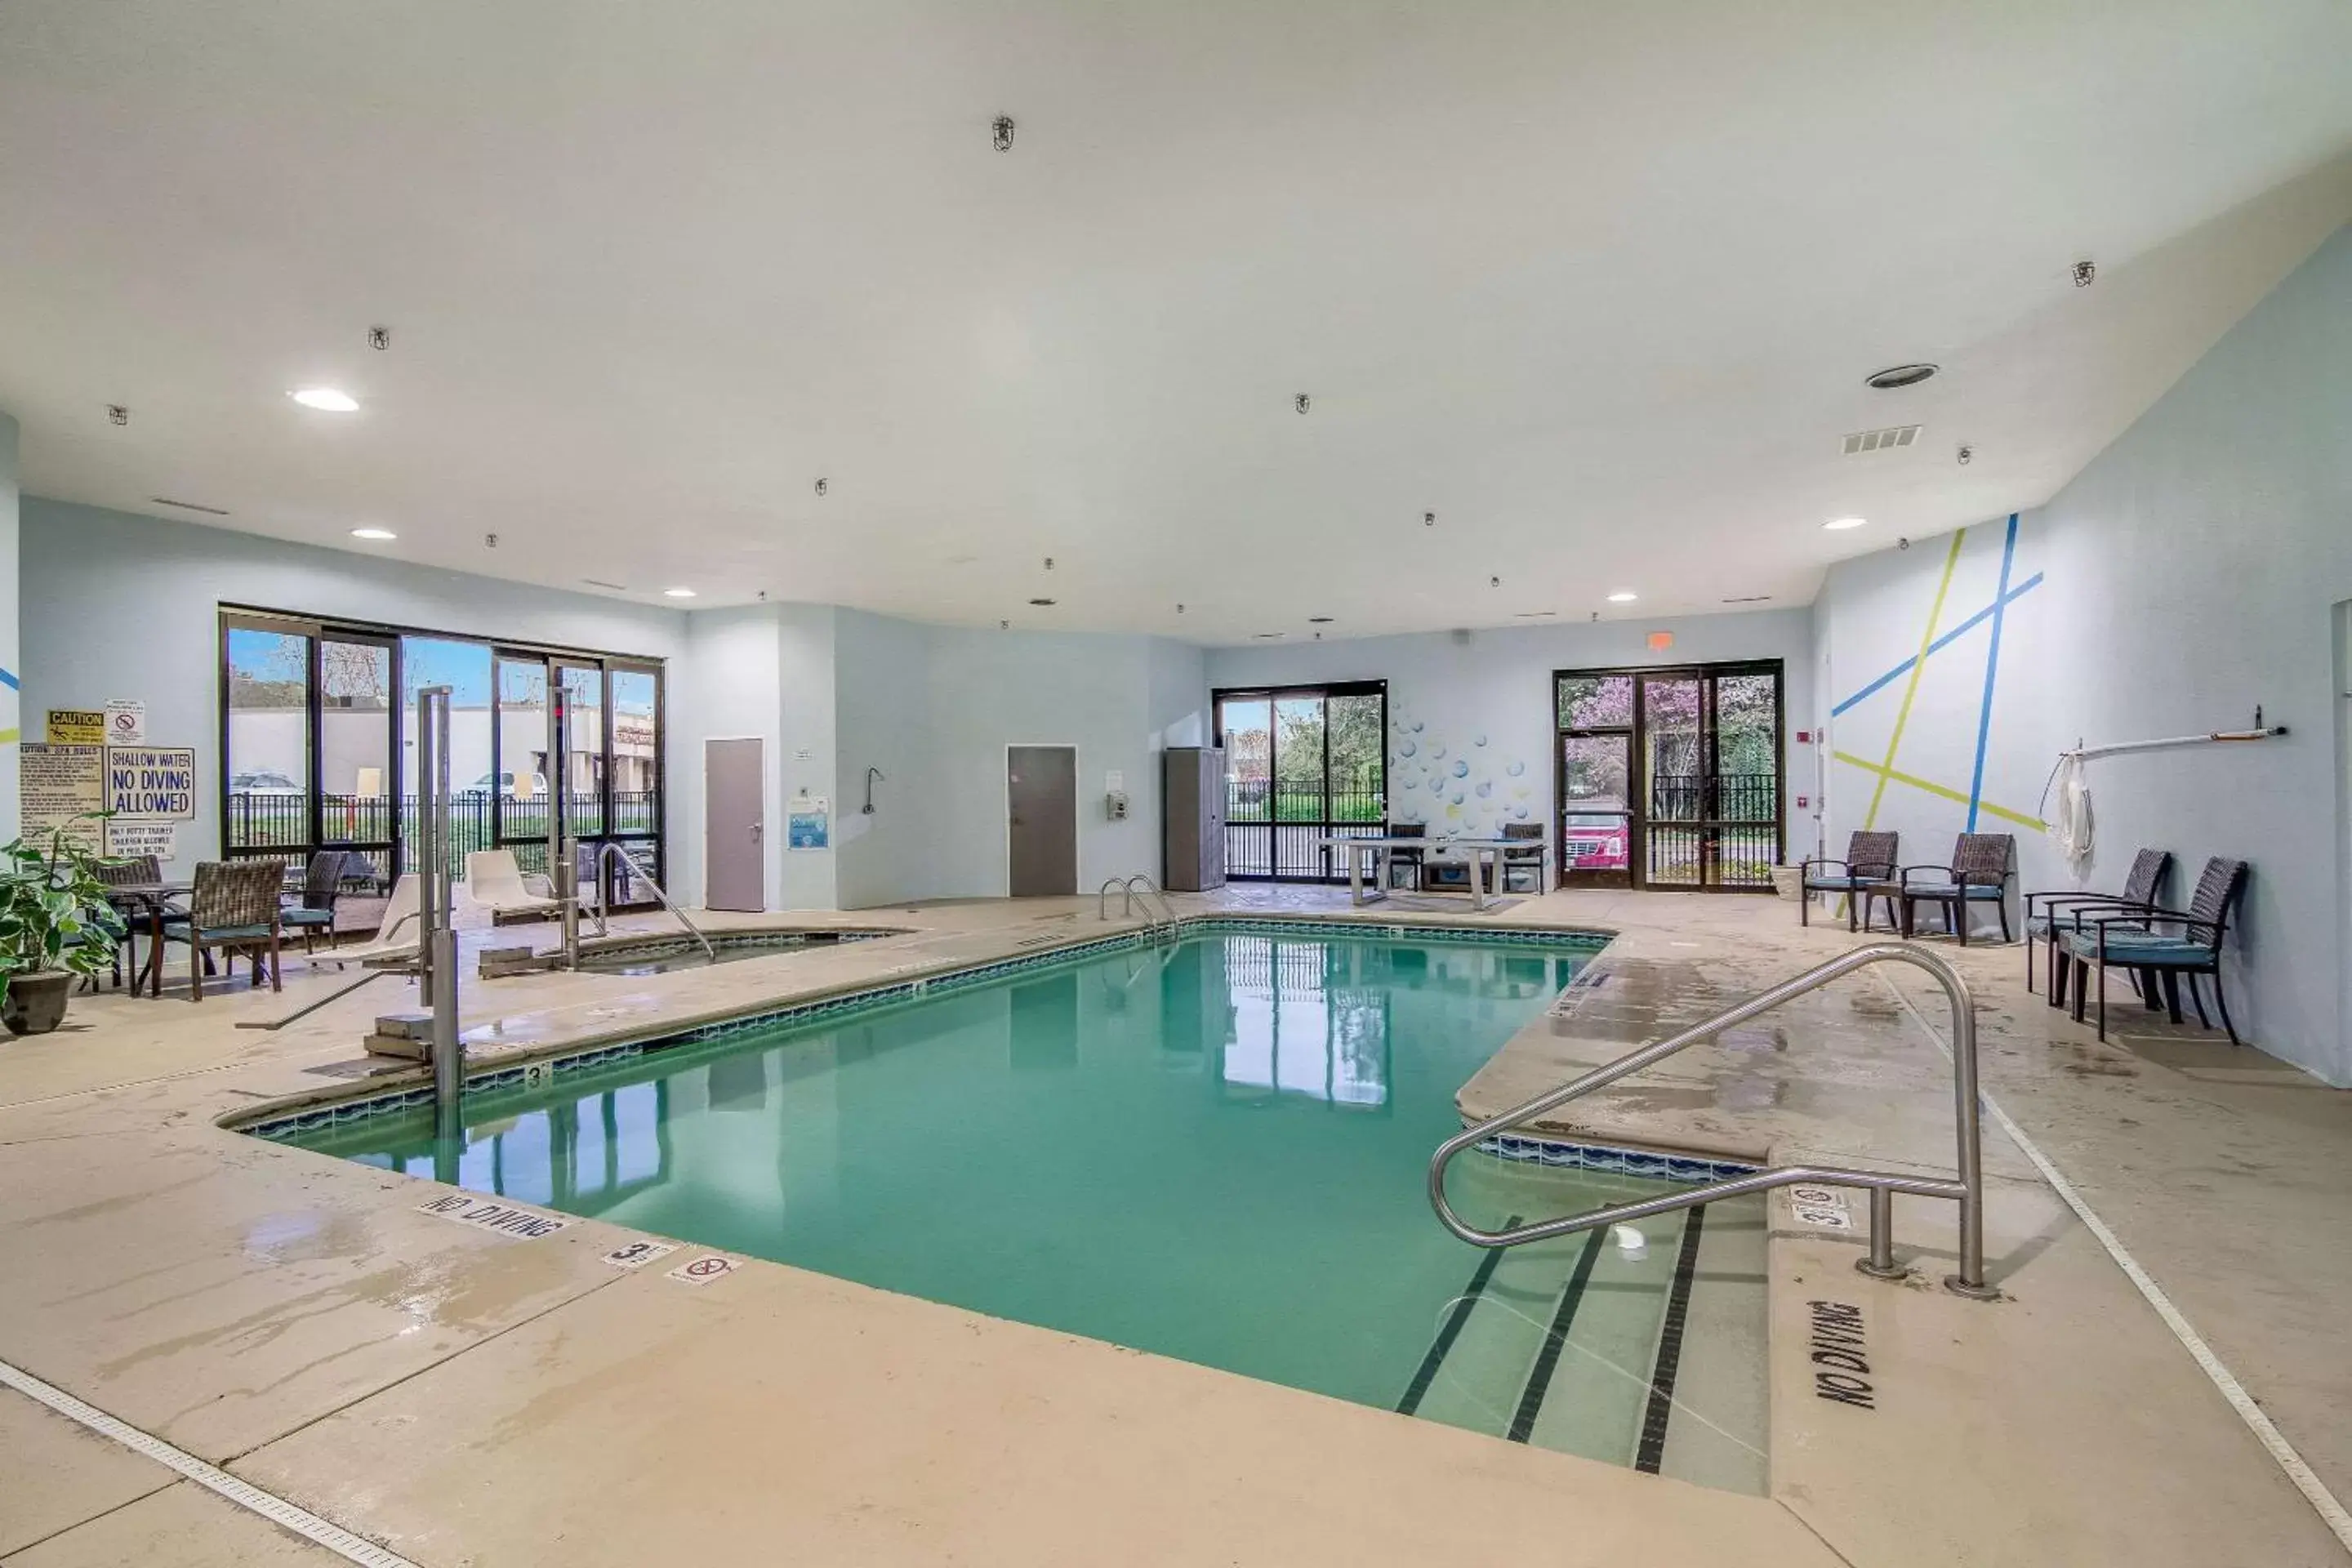 On site, Swimming Pool in Clarion Pointe Wake Forest – Raleigh North